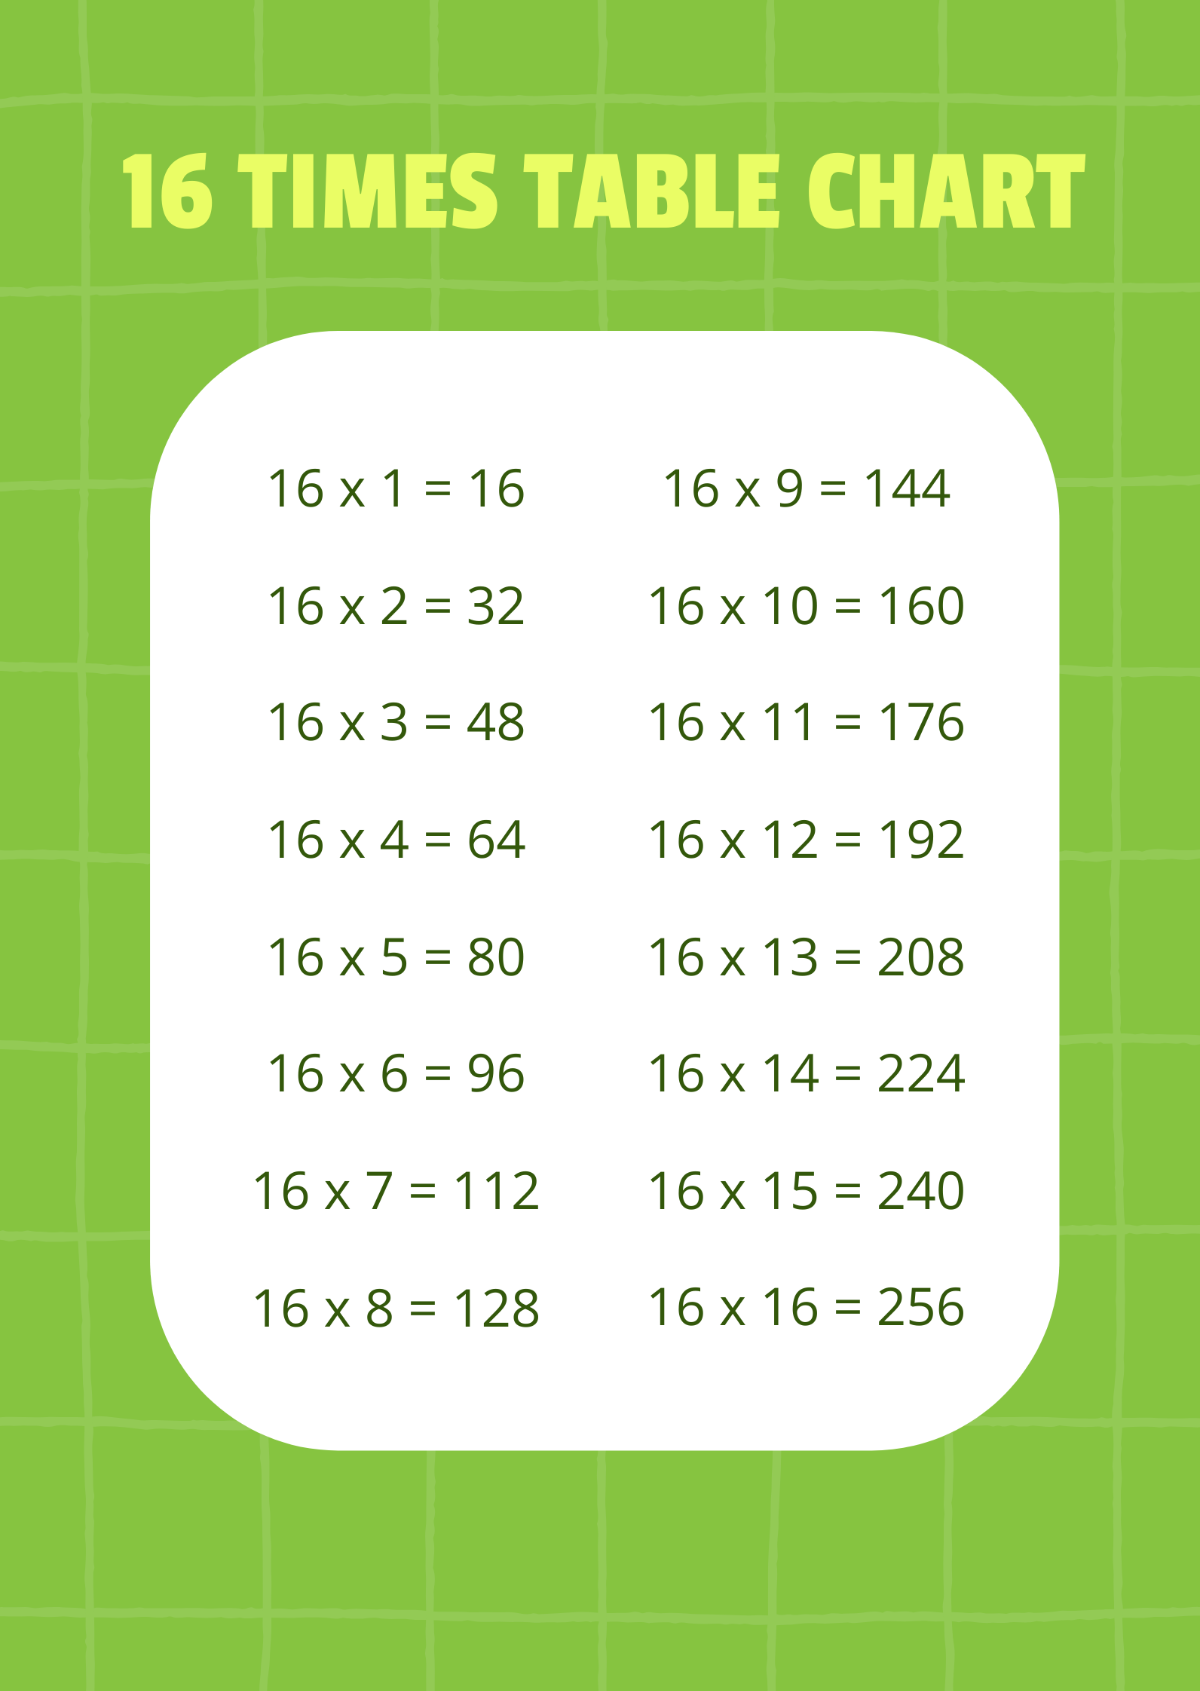 16 Times Table Chart Template